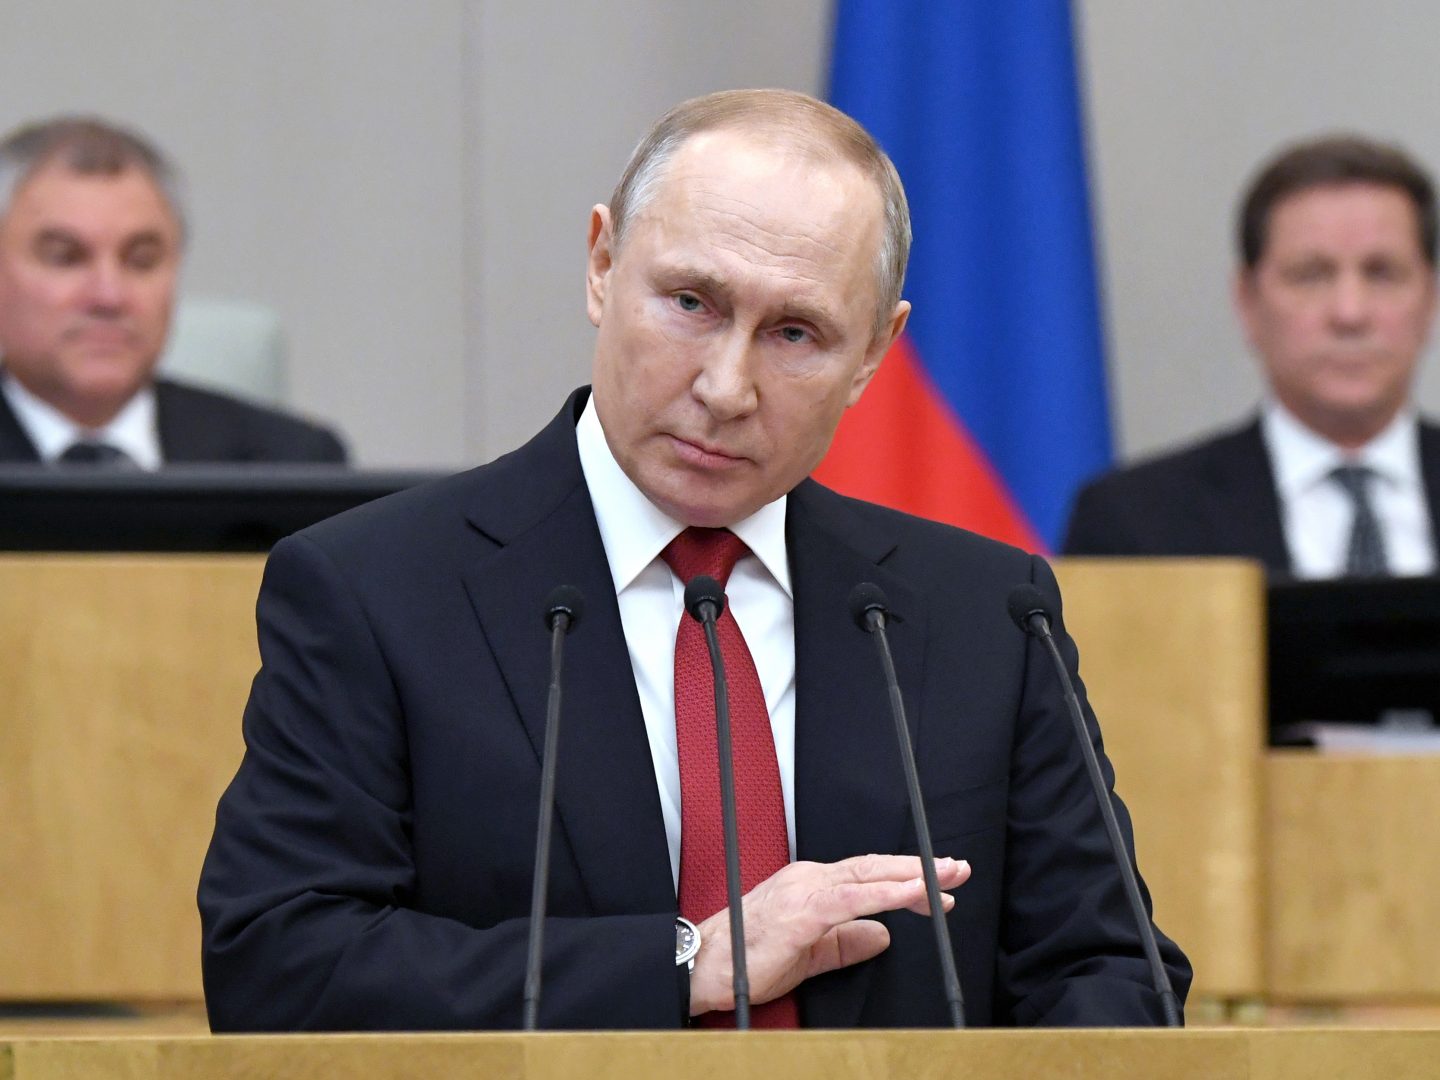 Russian President Vladimir Putin told lawmakers on Tuesday that he supports a proposed constitutional amendment that would allow him to seek two more terms and remain in power.